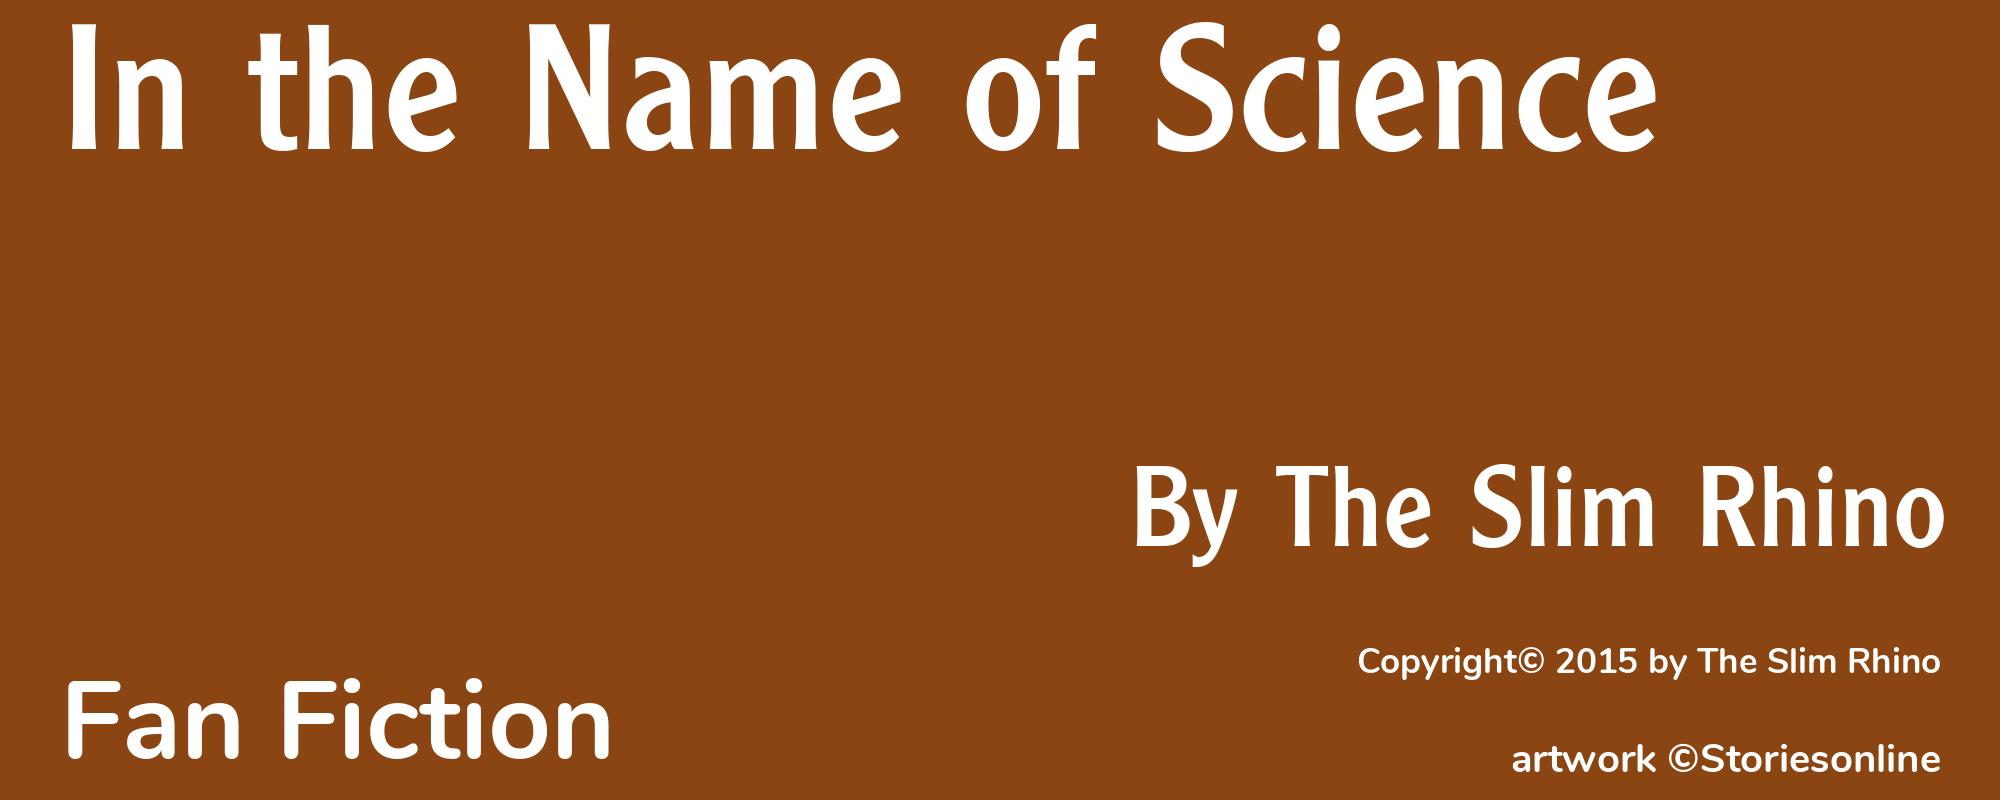 In the Name of Science - Cover